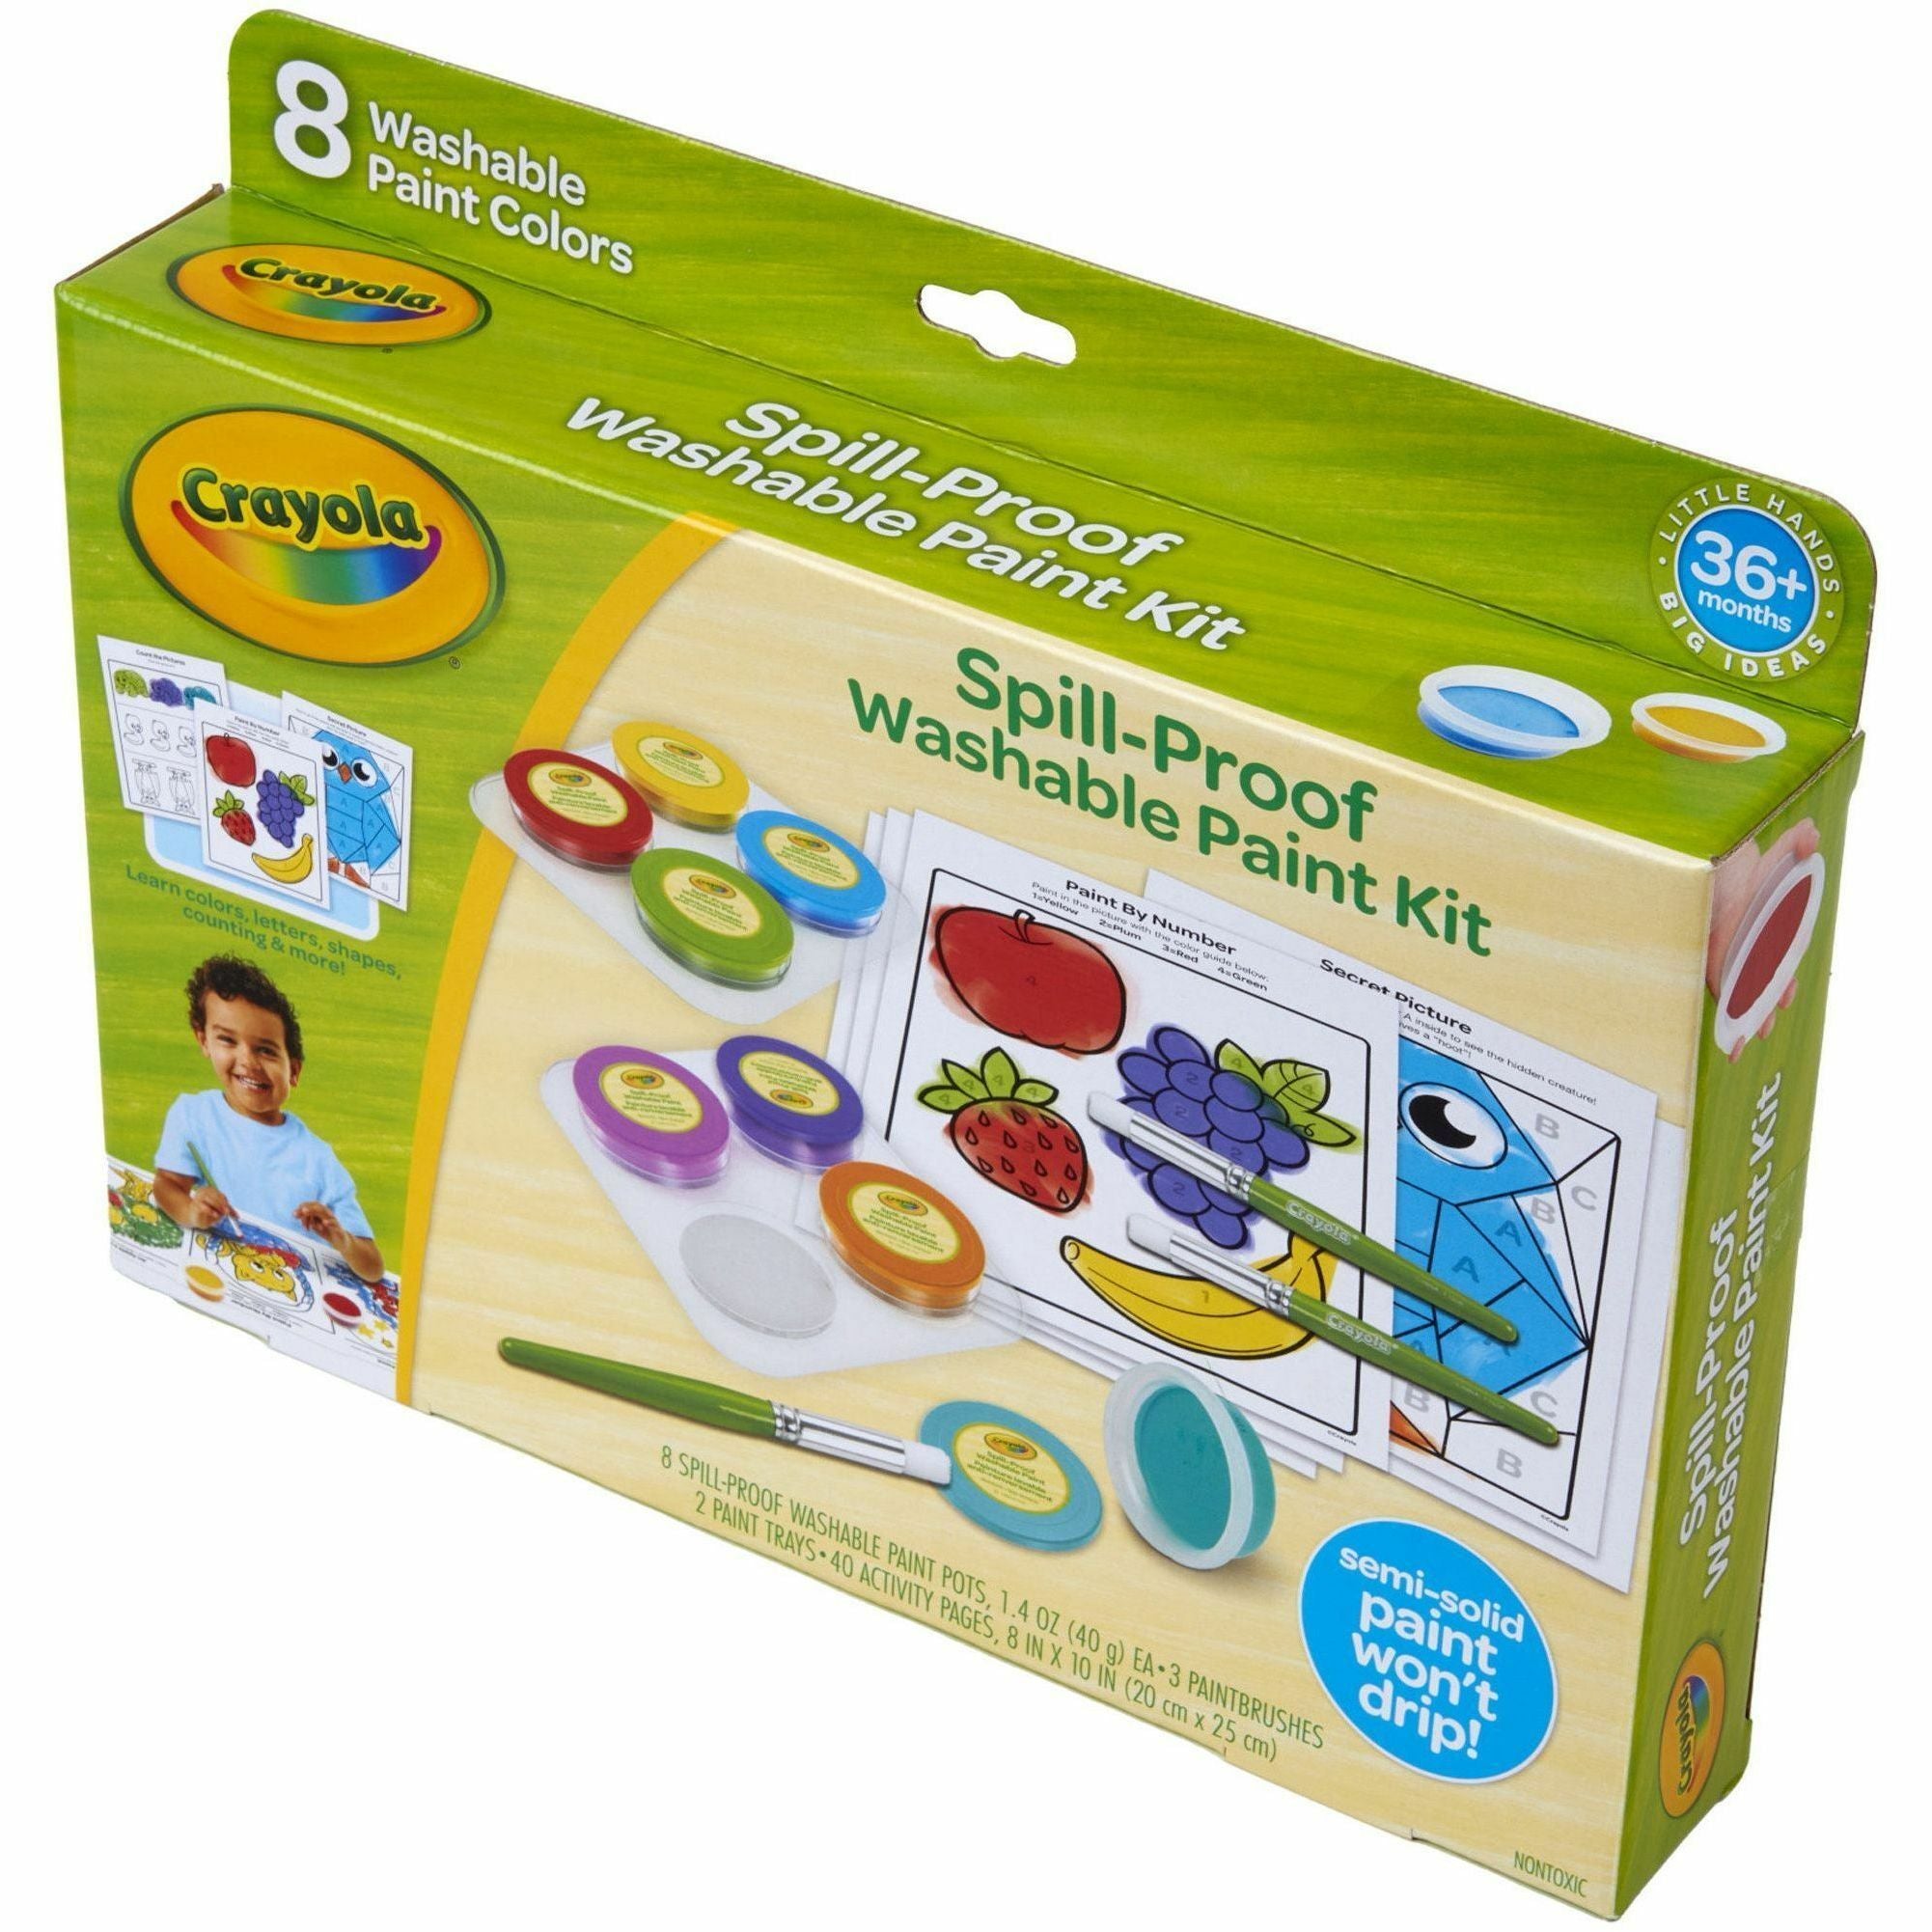 crayola-spill-proof-washable-paint-set-art-craft-fun-and-learning-recommended-for-3-year-1-kit_cyo811518 - 4